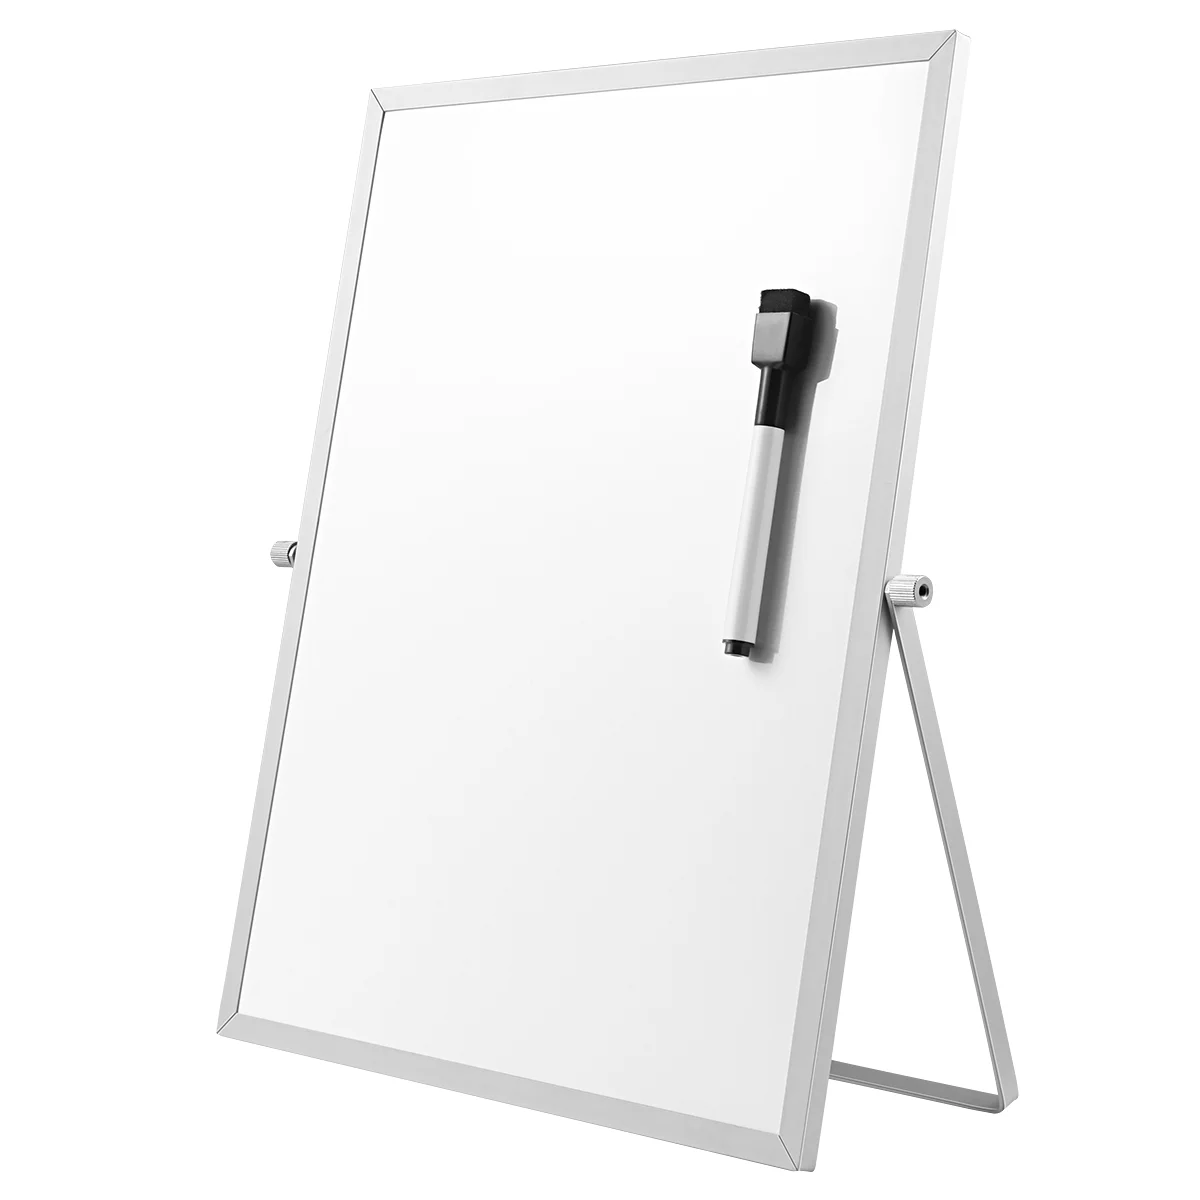 Magnetic White Board Dry Erase Board Double Sided Practical with Stand White Board for Office School Home Whiteboard Erasable a4 size mini whiteboard double sided writing kid dry erase board calendar school home practice drawing message bulletin board